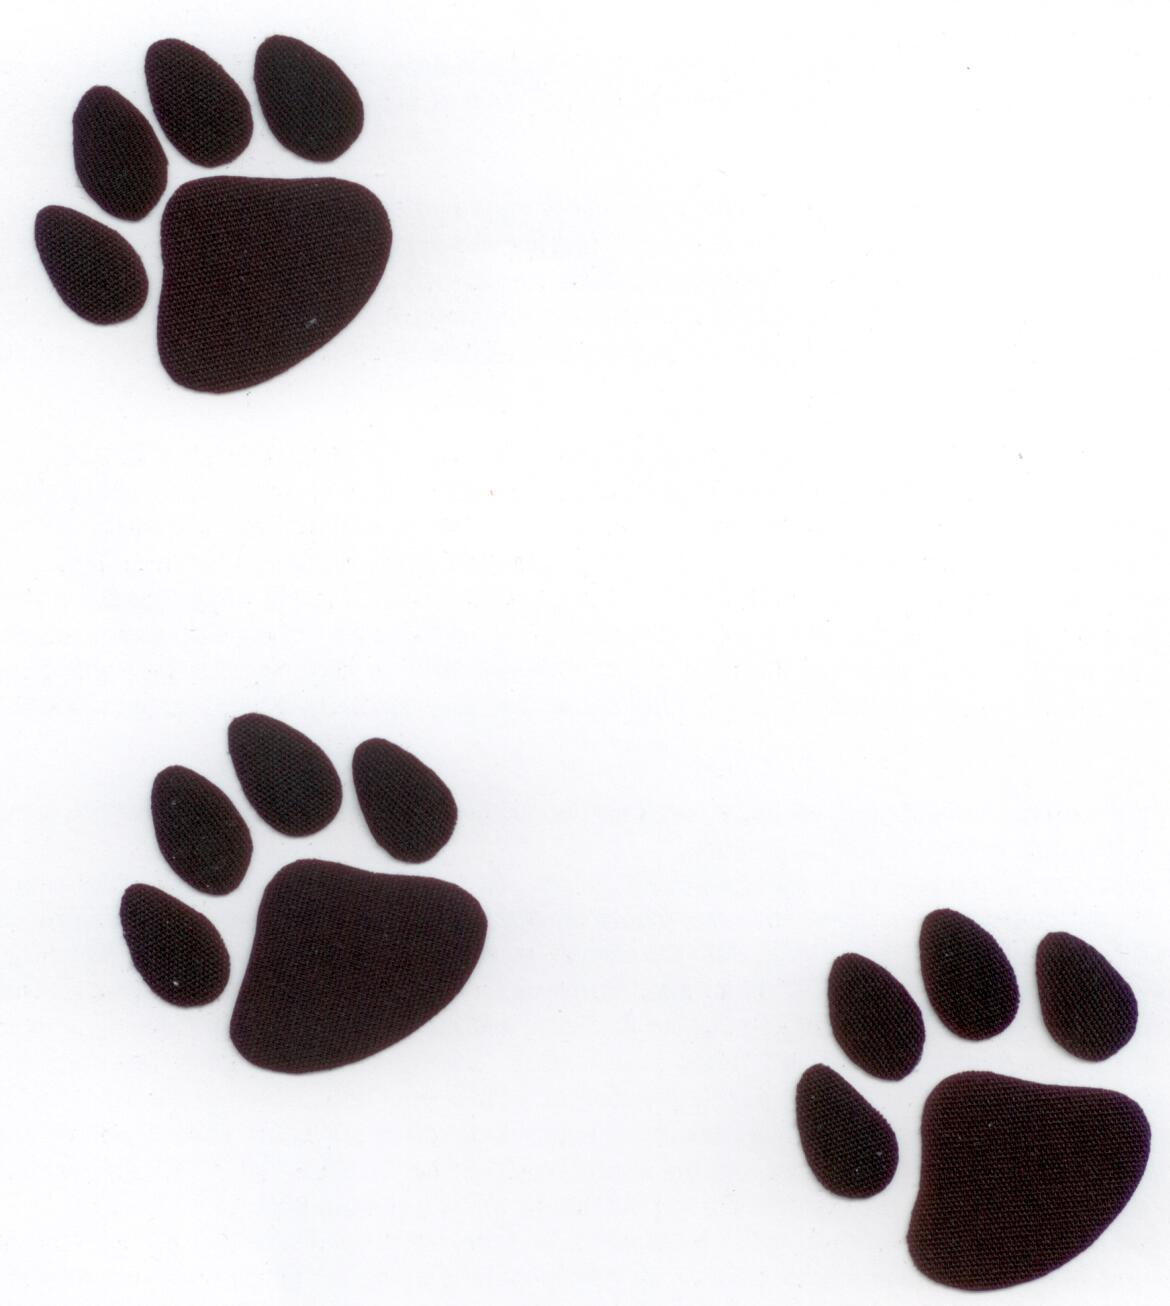 Bulldog Paw Prints Free Cliparts That You Can Download To You